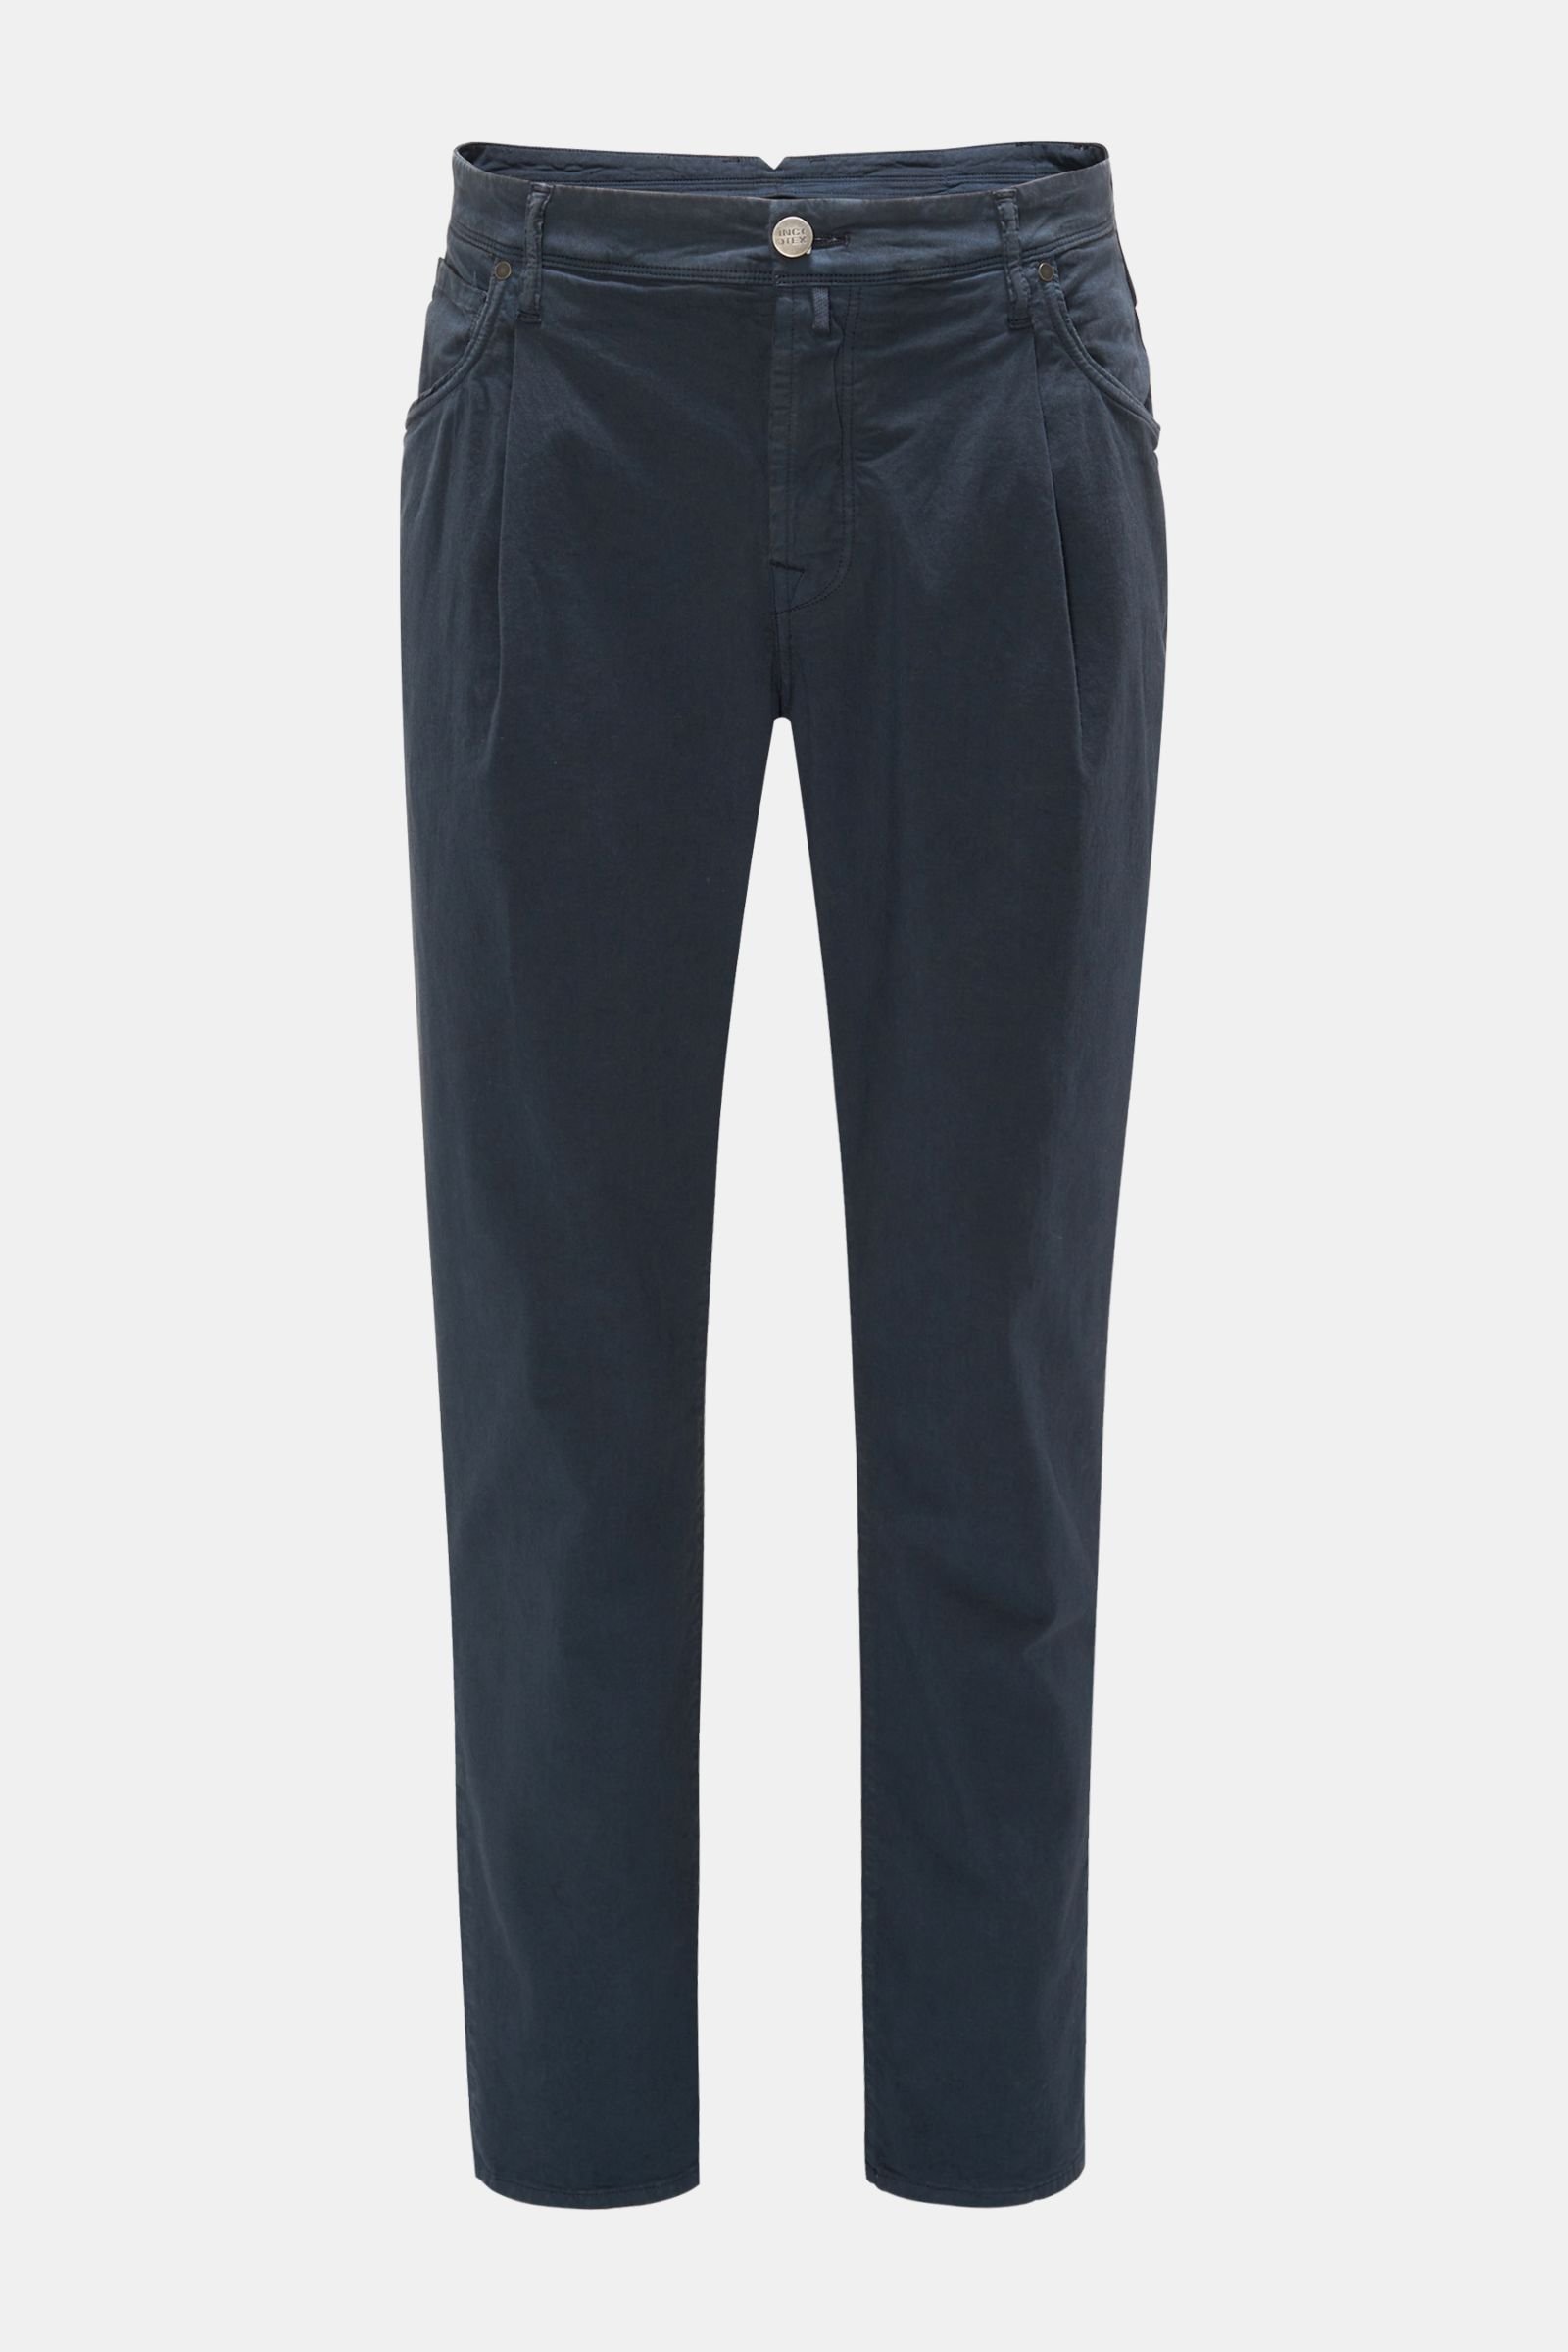 Cotton trousers 'Tapered Fit' navy